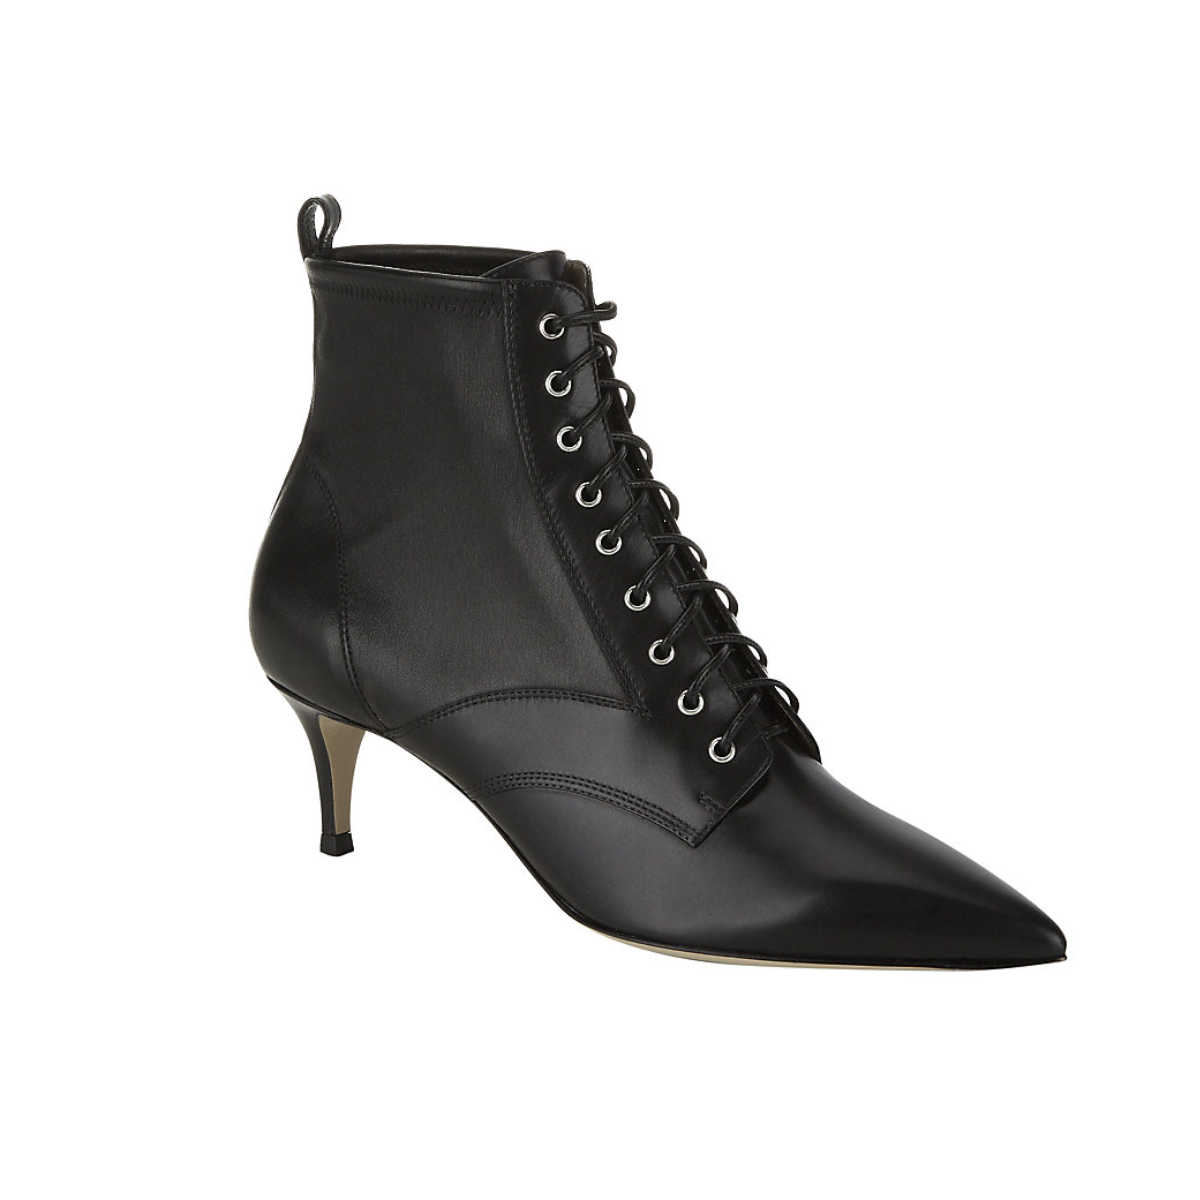 gianvito rossi leather boots